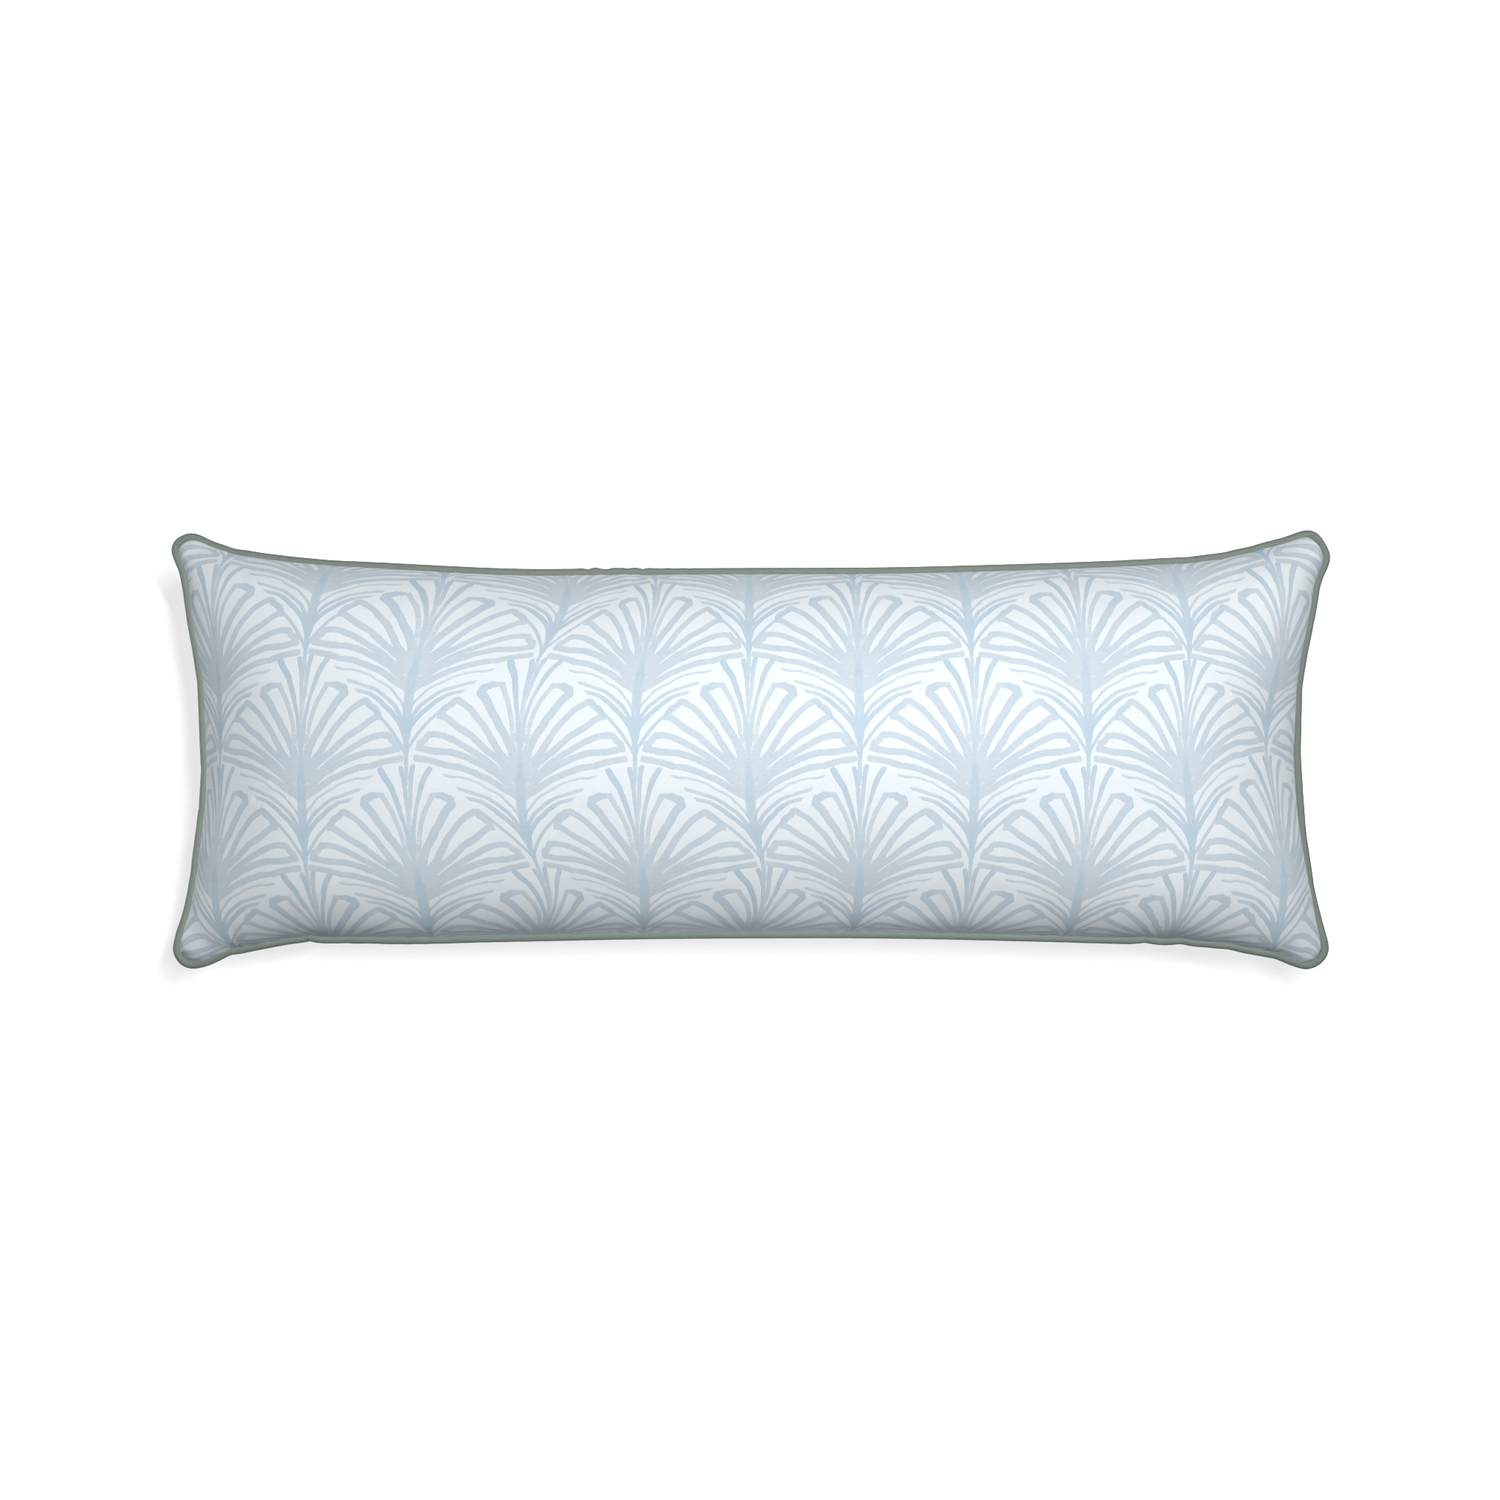 Xl-lumbar suzy sky custom sky blue palmpillow with sage piping on white background